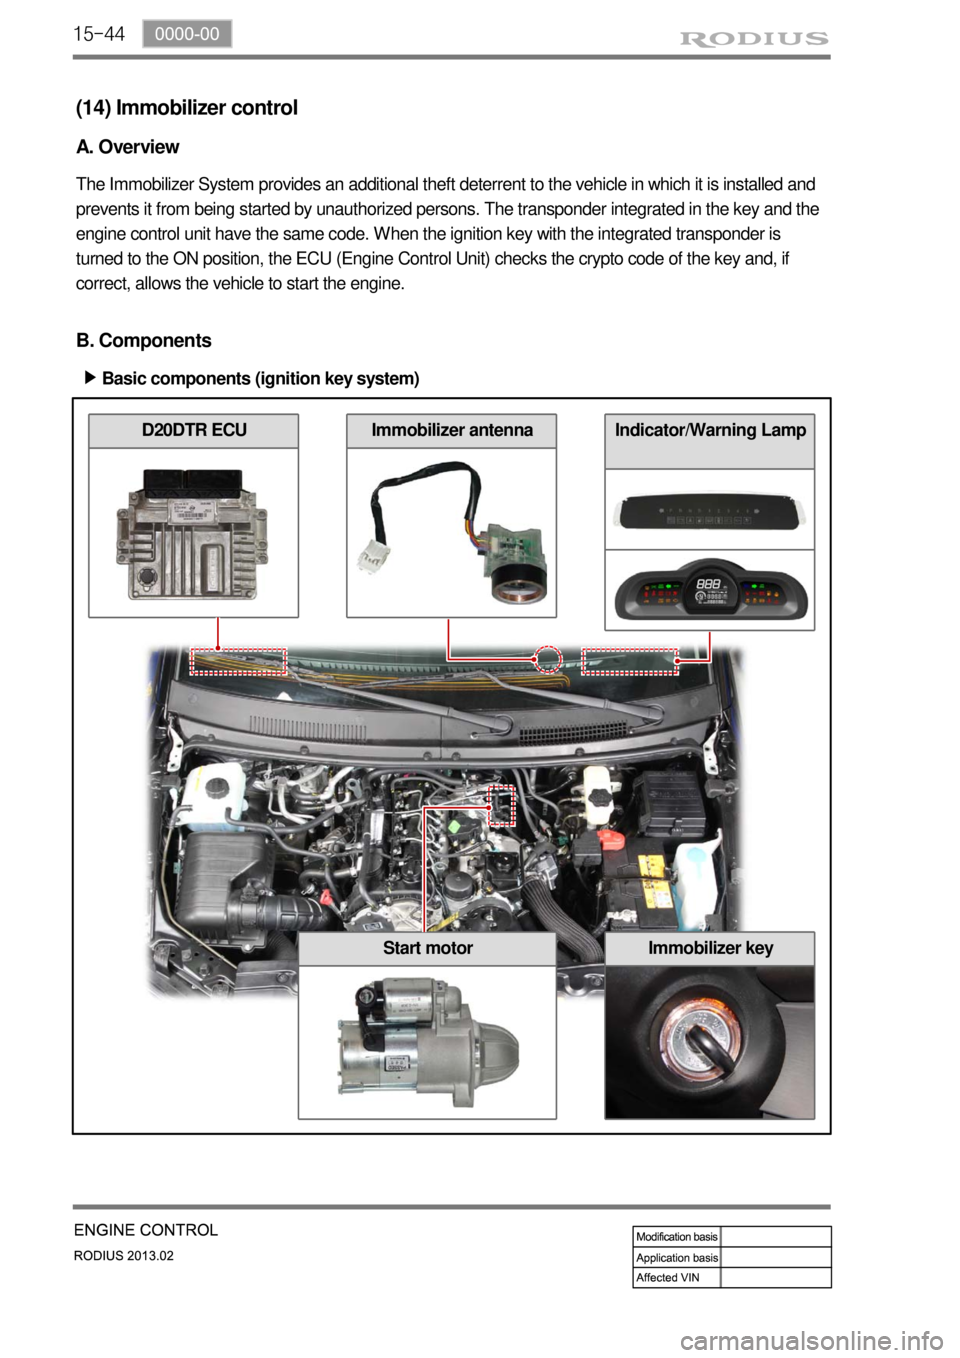 SSANGYONG TURISMO 2013  Service Manual 15-44
(14) Immobilizer control
A. Overview
The Immobilizer System provides an additional theft deterrent to the vehicle in which it is installed and 
prevents it from being started by unauthorized per